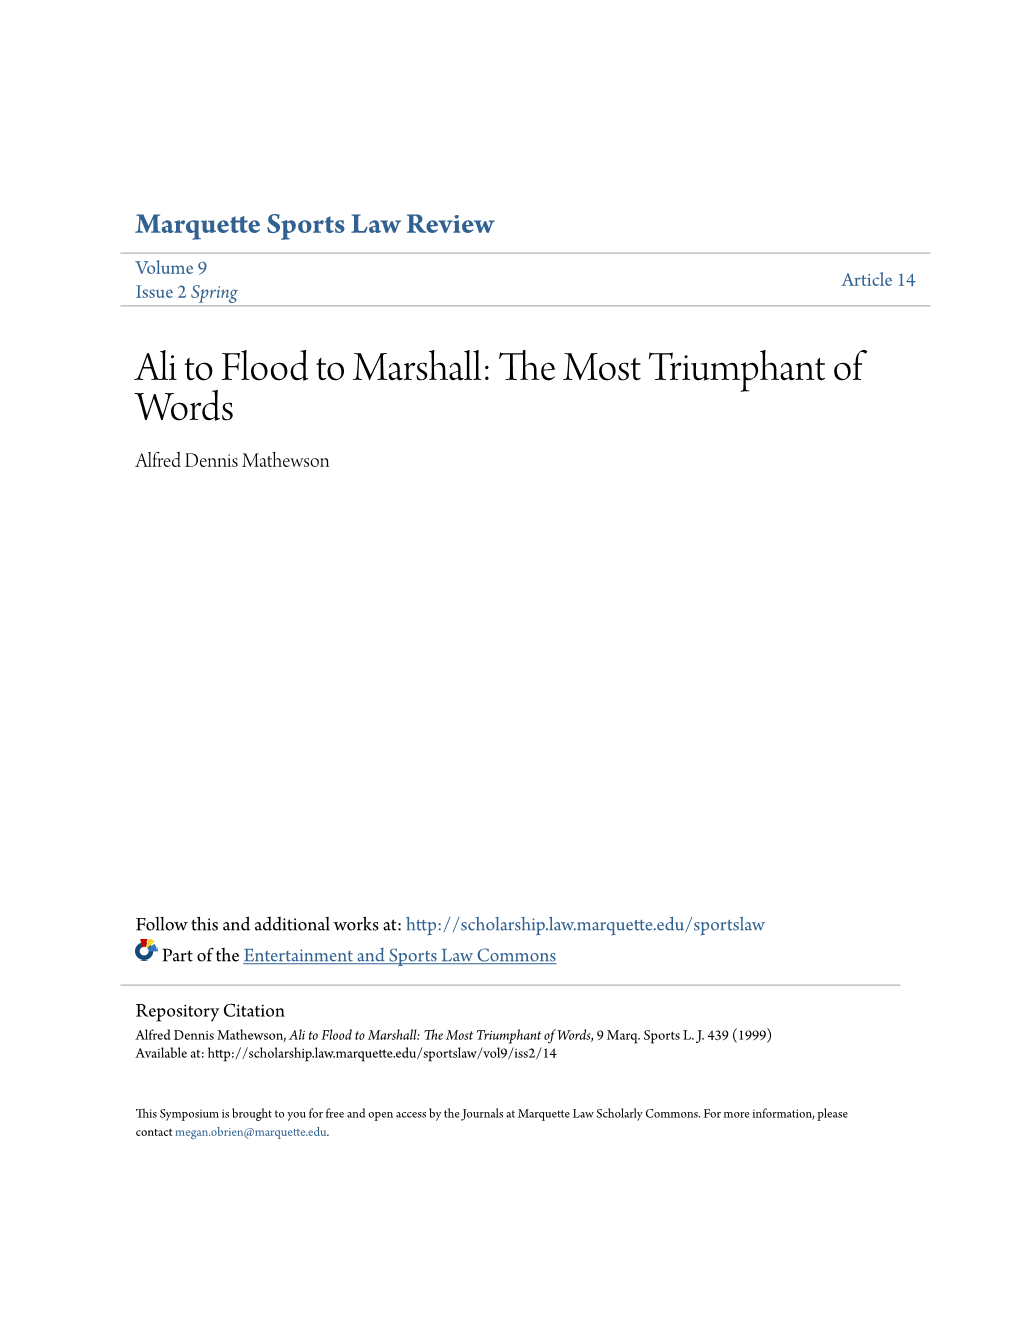 Ali to Flood to Marshall: the Most Triumphant of Words, 9 Marq